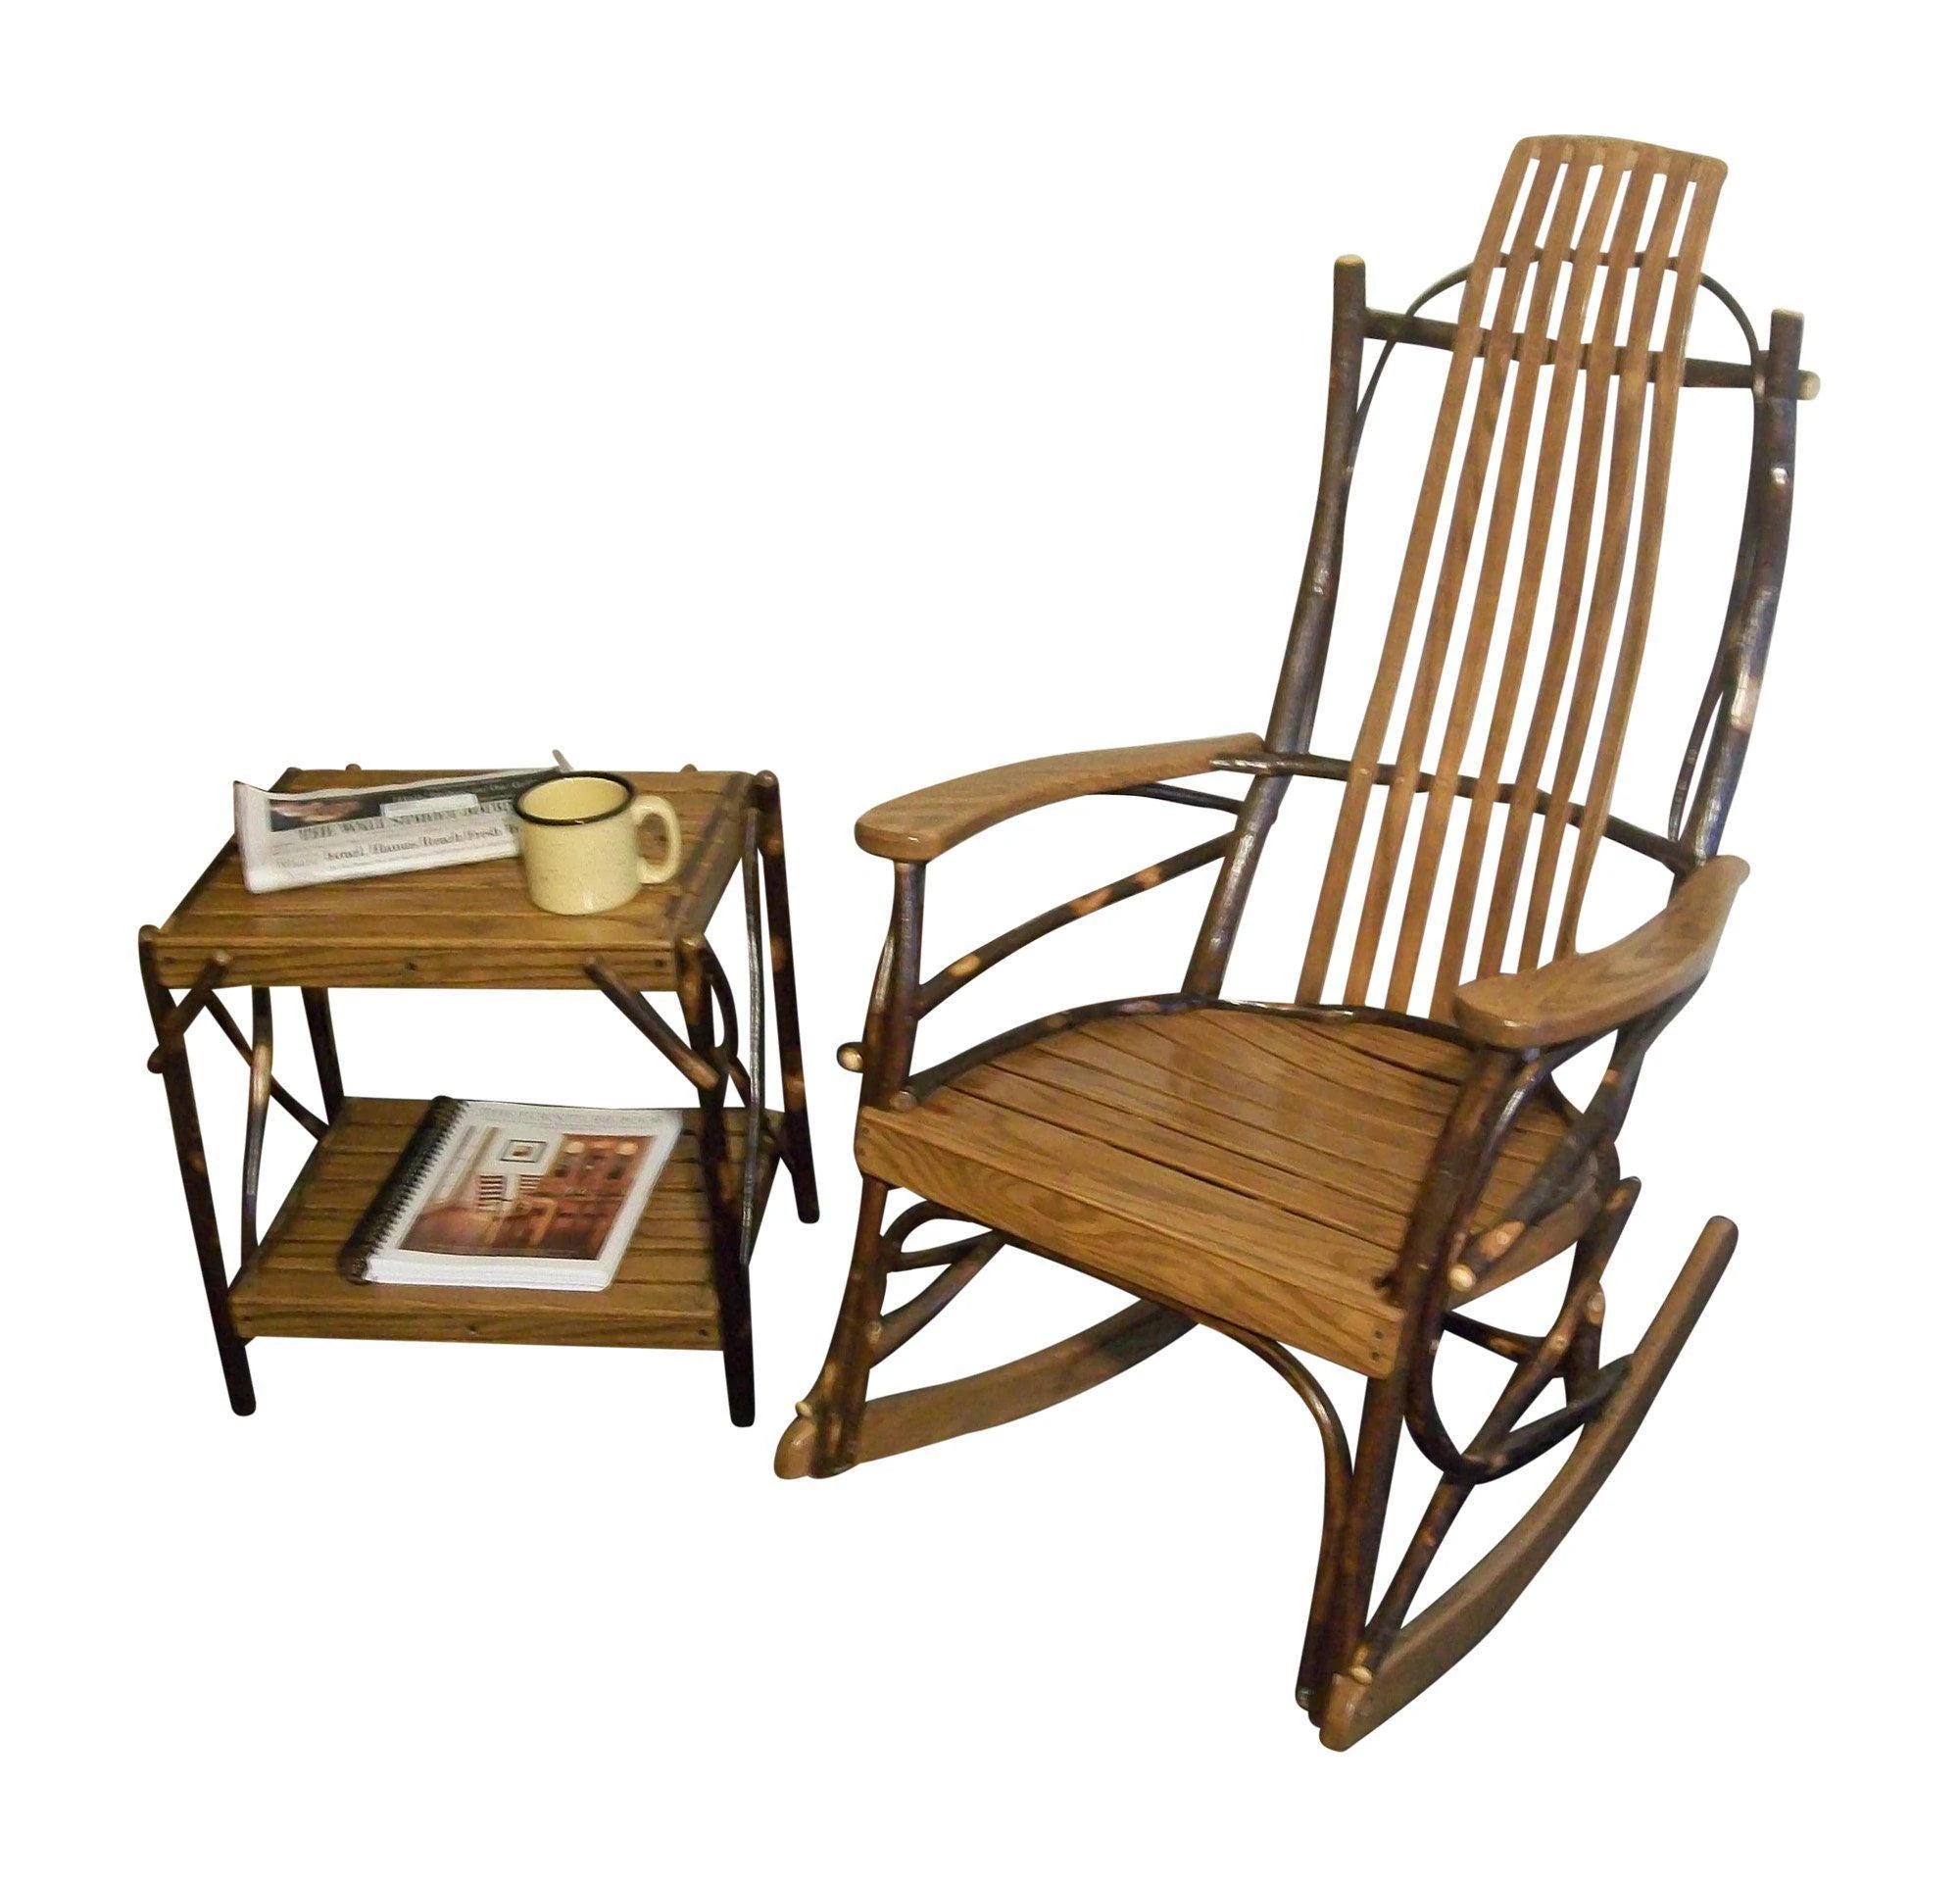 A&L Furniture Amish Bentwood 7-Slat Hickory Rocking Chair